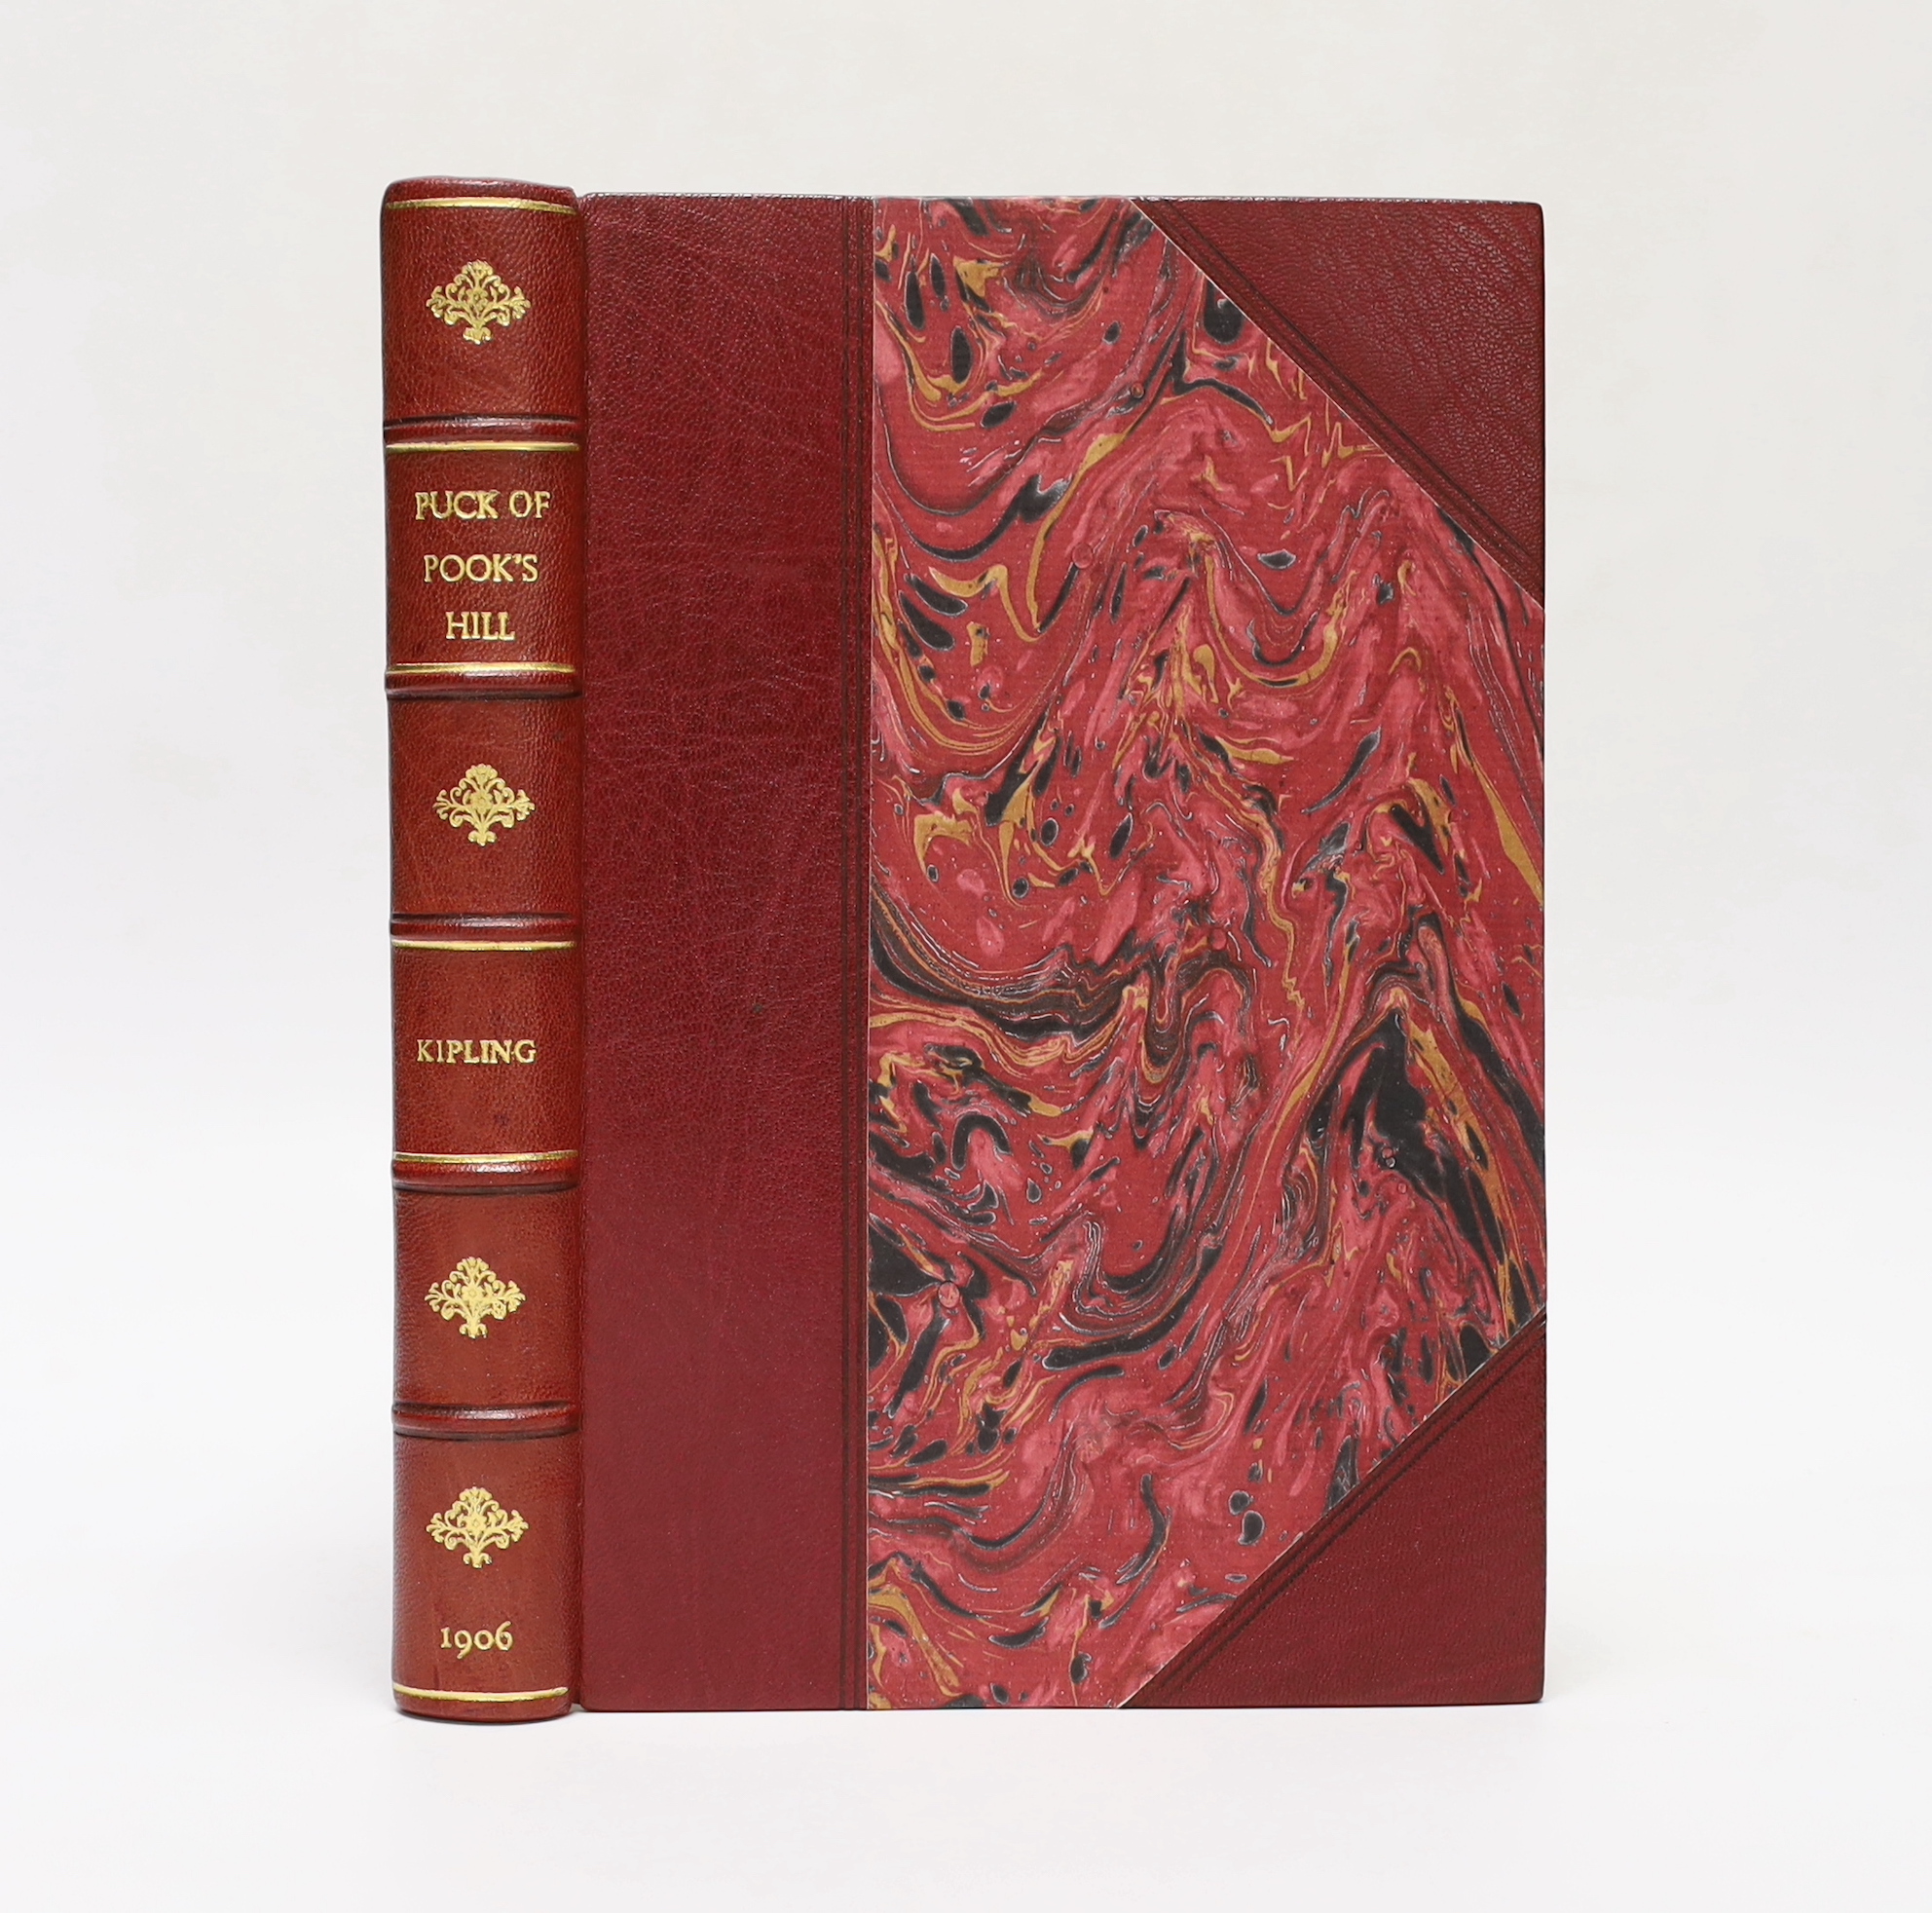 Kipling, Rudyard - Puck of Pook's Hill. First edition, 20 full page illus. (by H.R. Millar), half title and 5 advert. leaves; sometime rebound red half morocco and marbled boards, gilt decorated, ruled and lettered panel